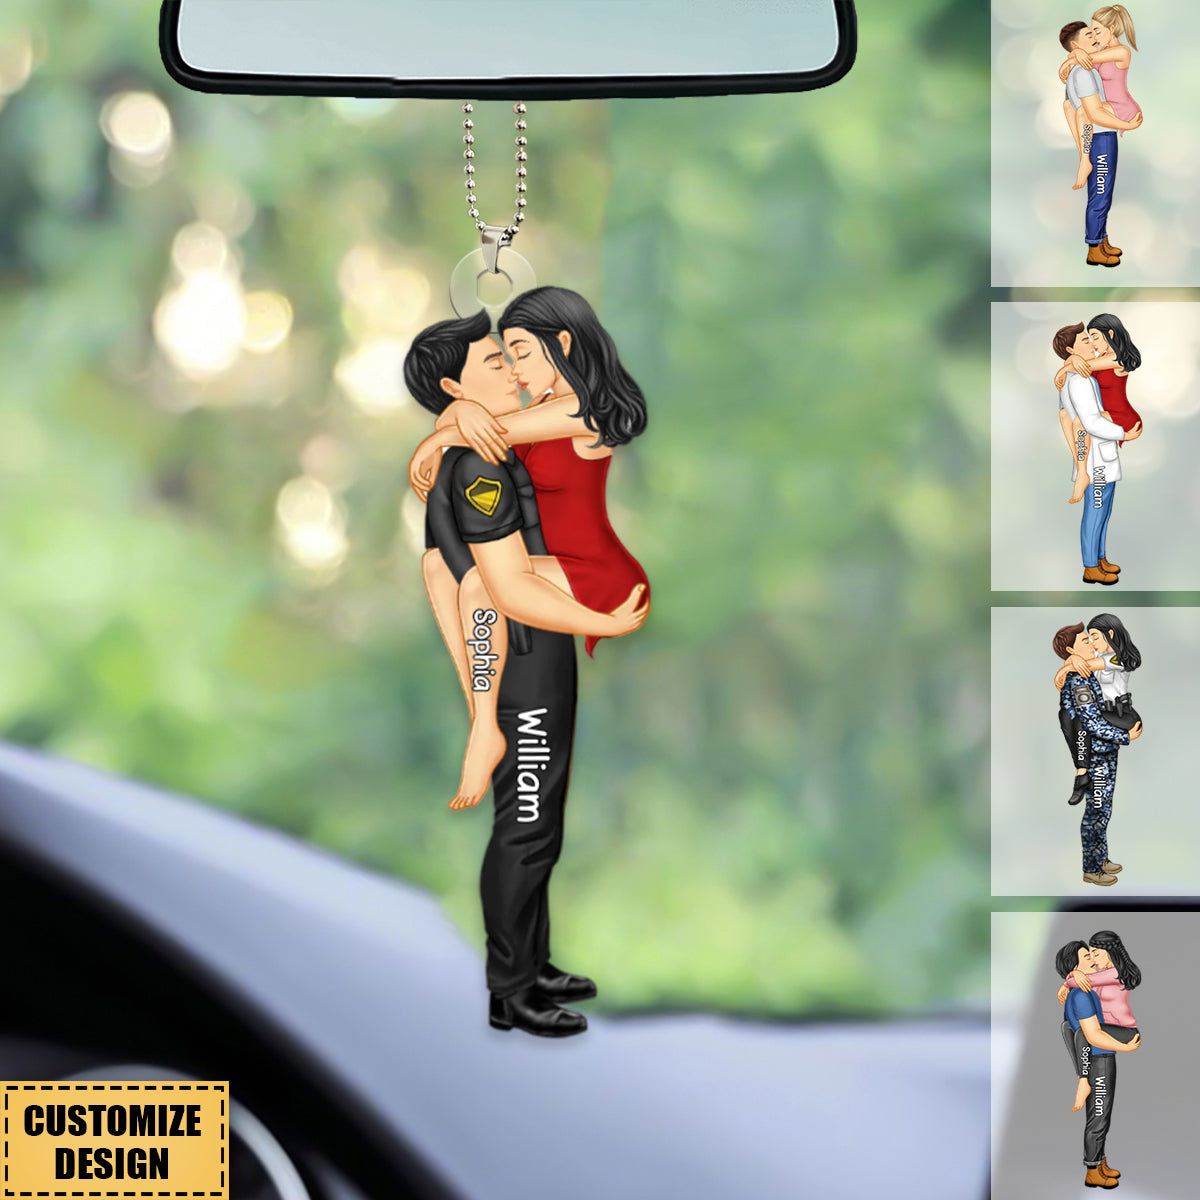 Personalized Couple Kissing Occupation Car Ornament - Gift For Couples, Nurse, Firefighter, Police Officer